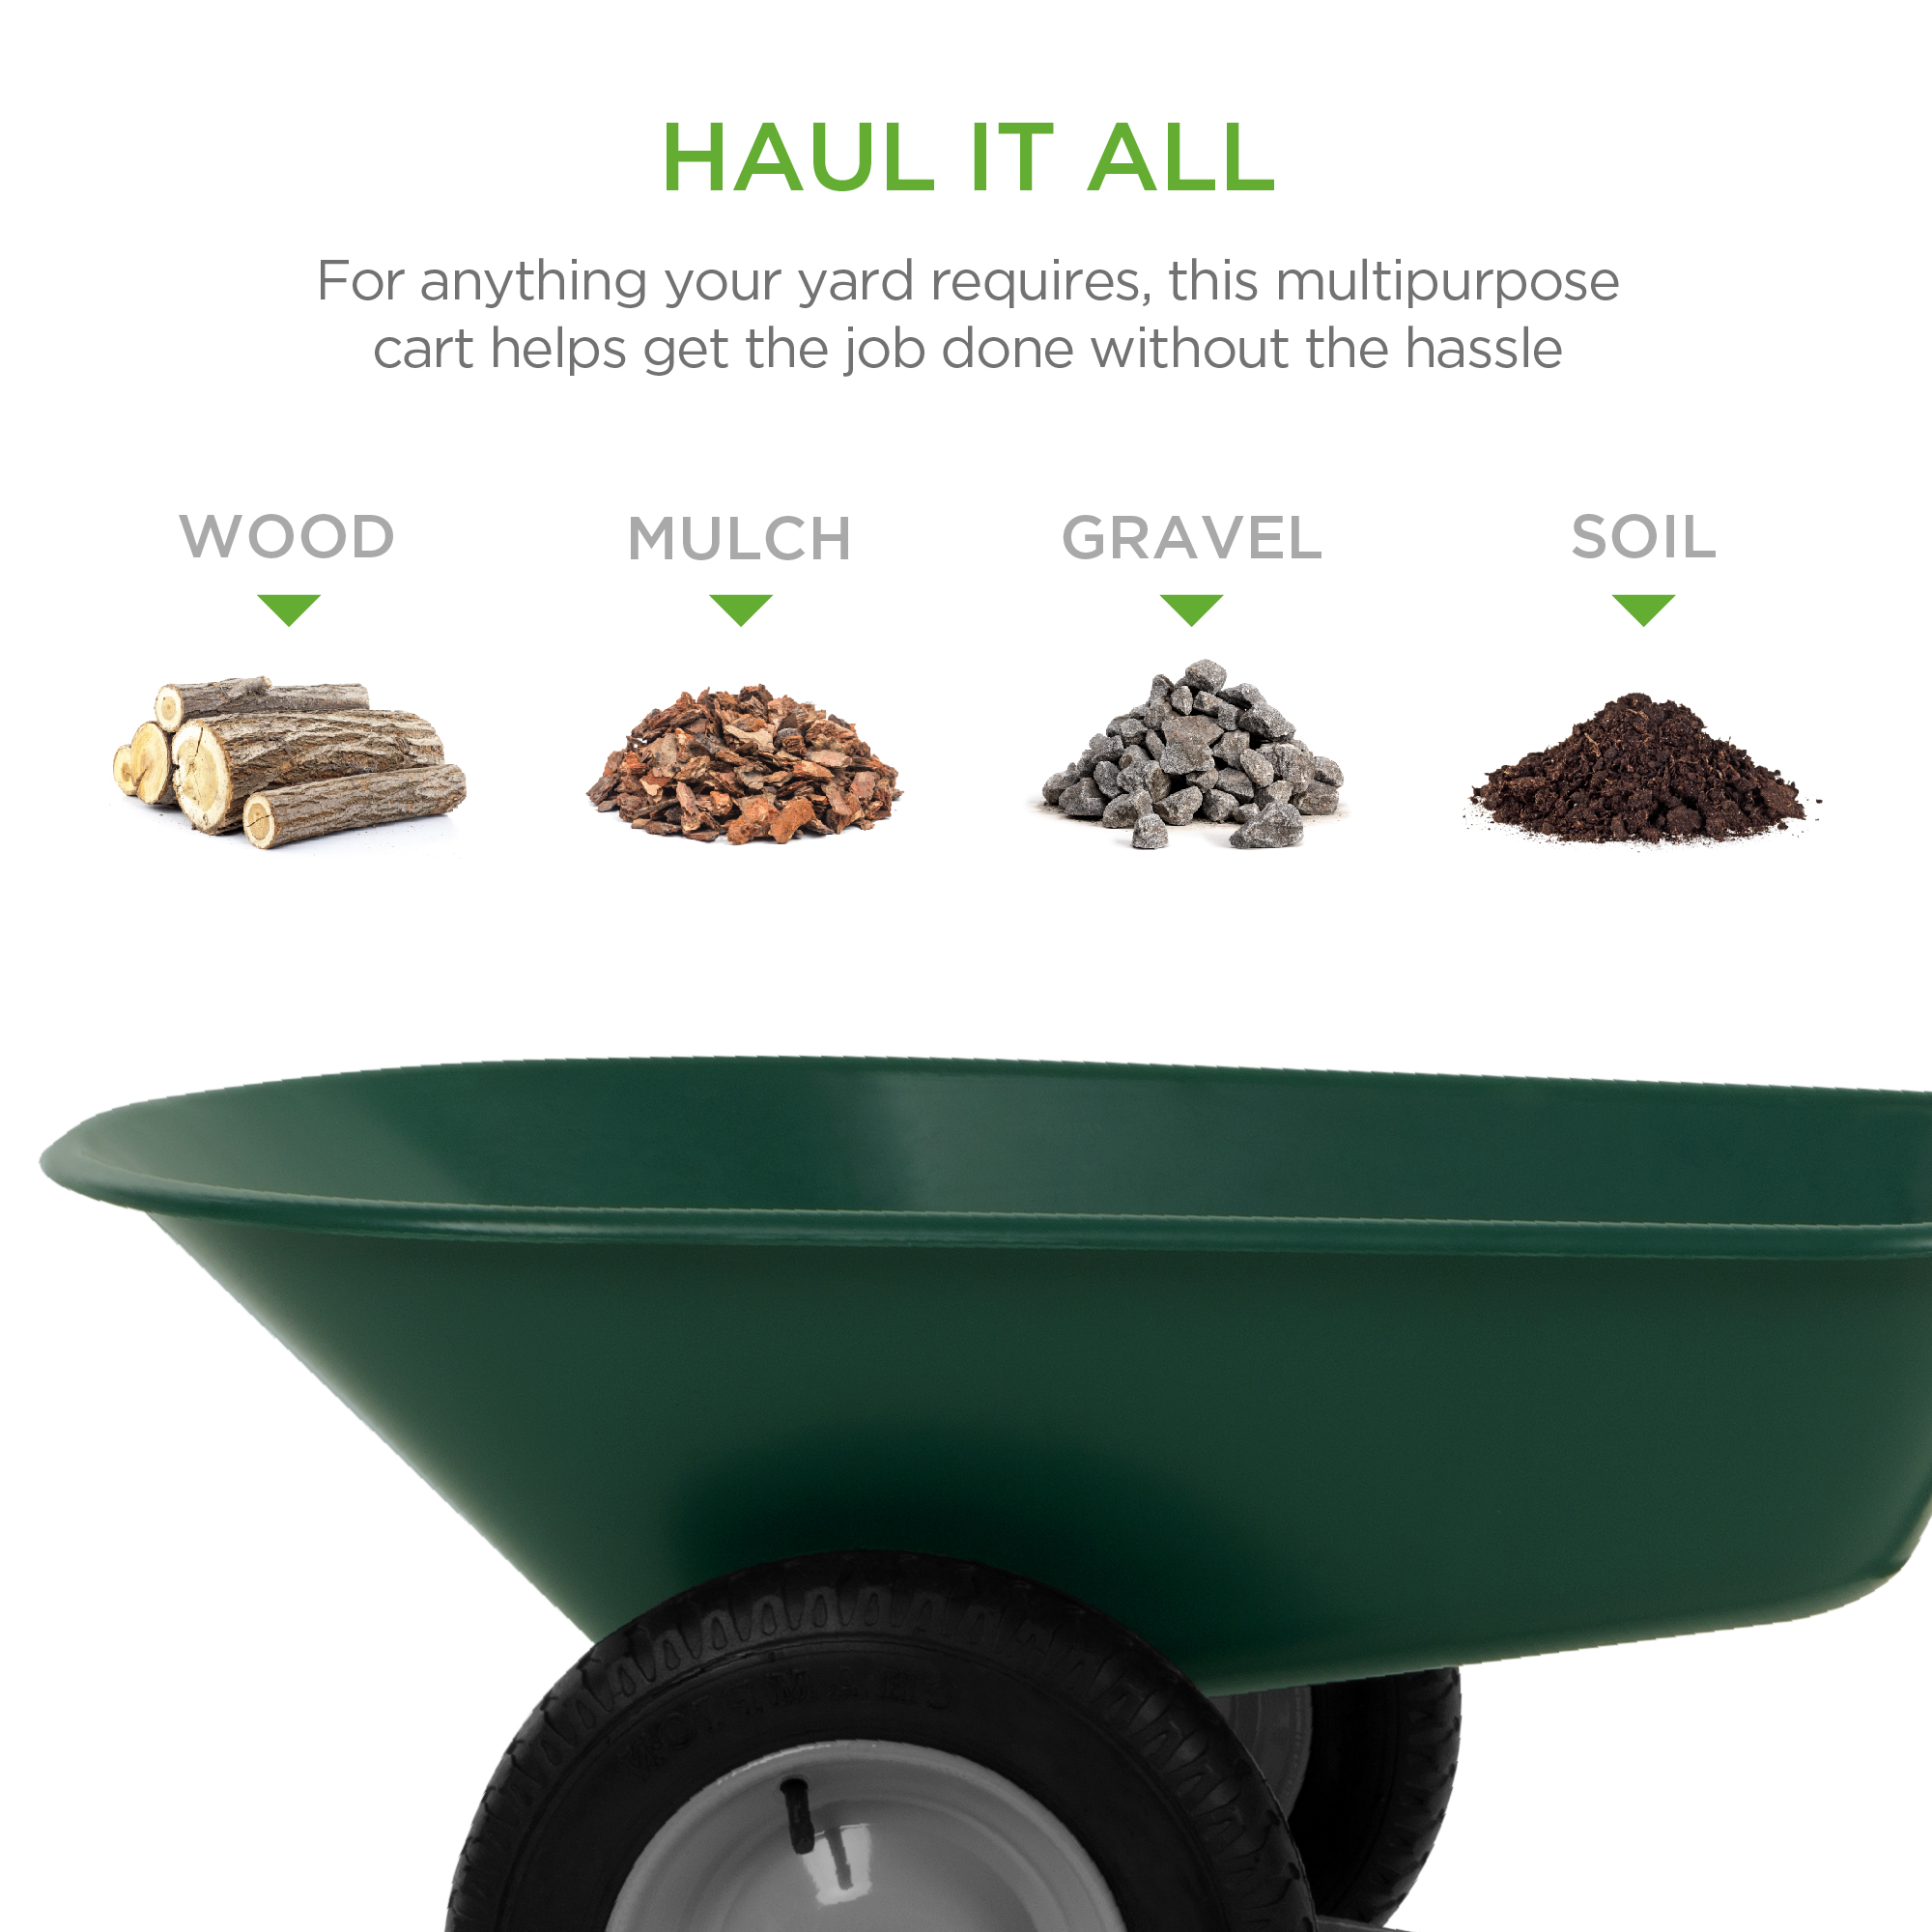 Best Choice Products Dual-Wheel Home Wheelbarrow Yard Garden Cart for Lawn, Construction - Green - image 3 of 8